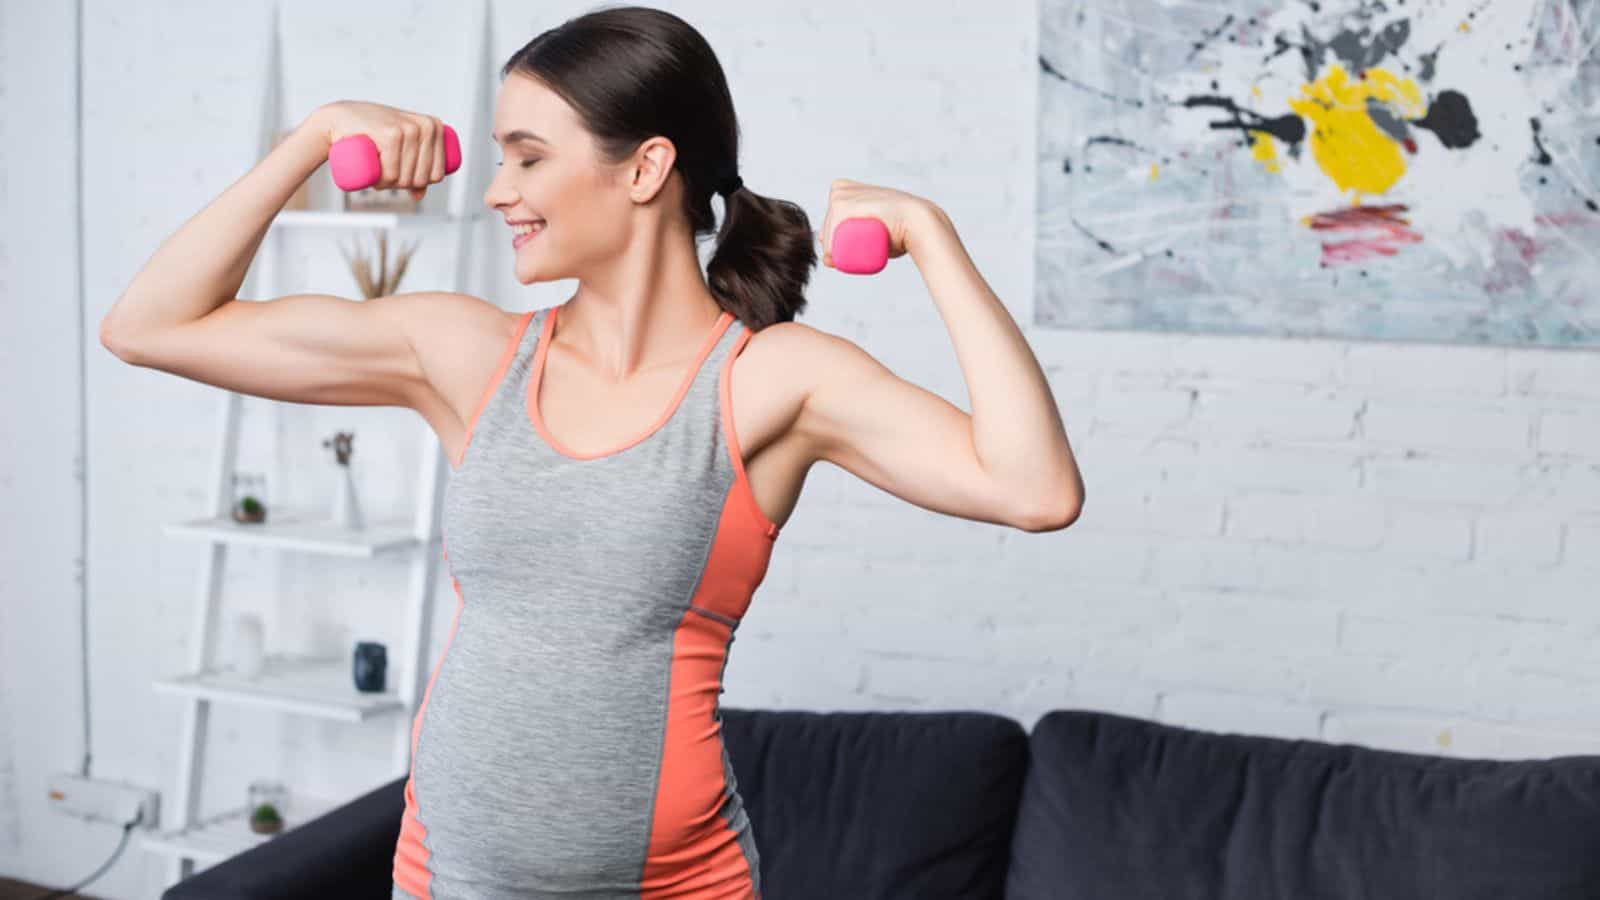 Happy pregnant woman exercising with pink dumbbells at home